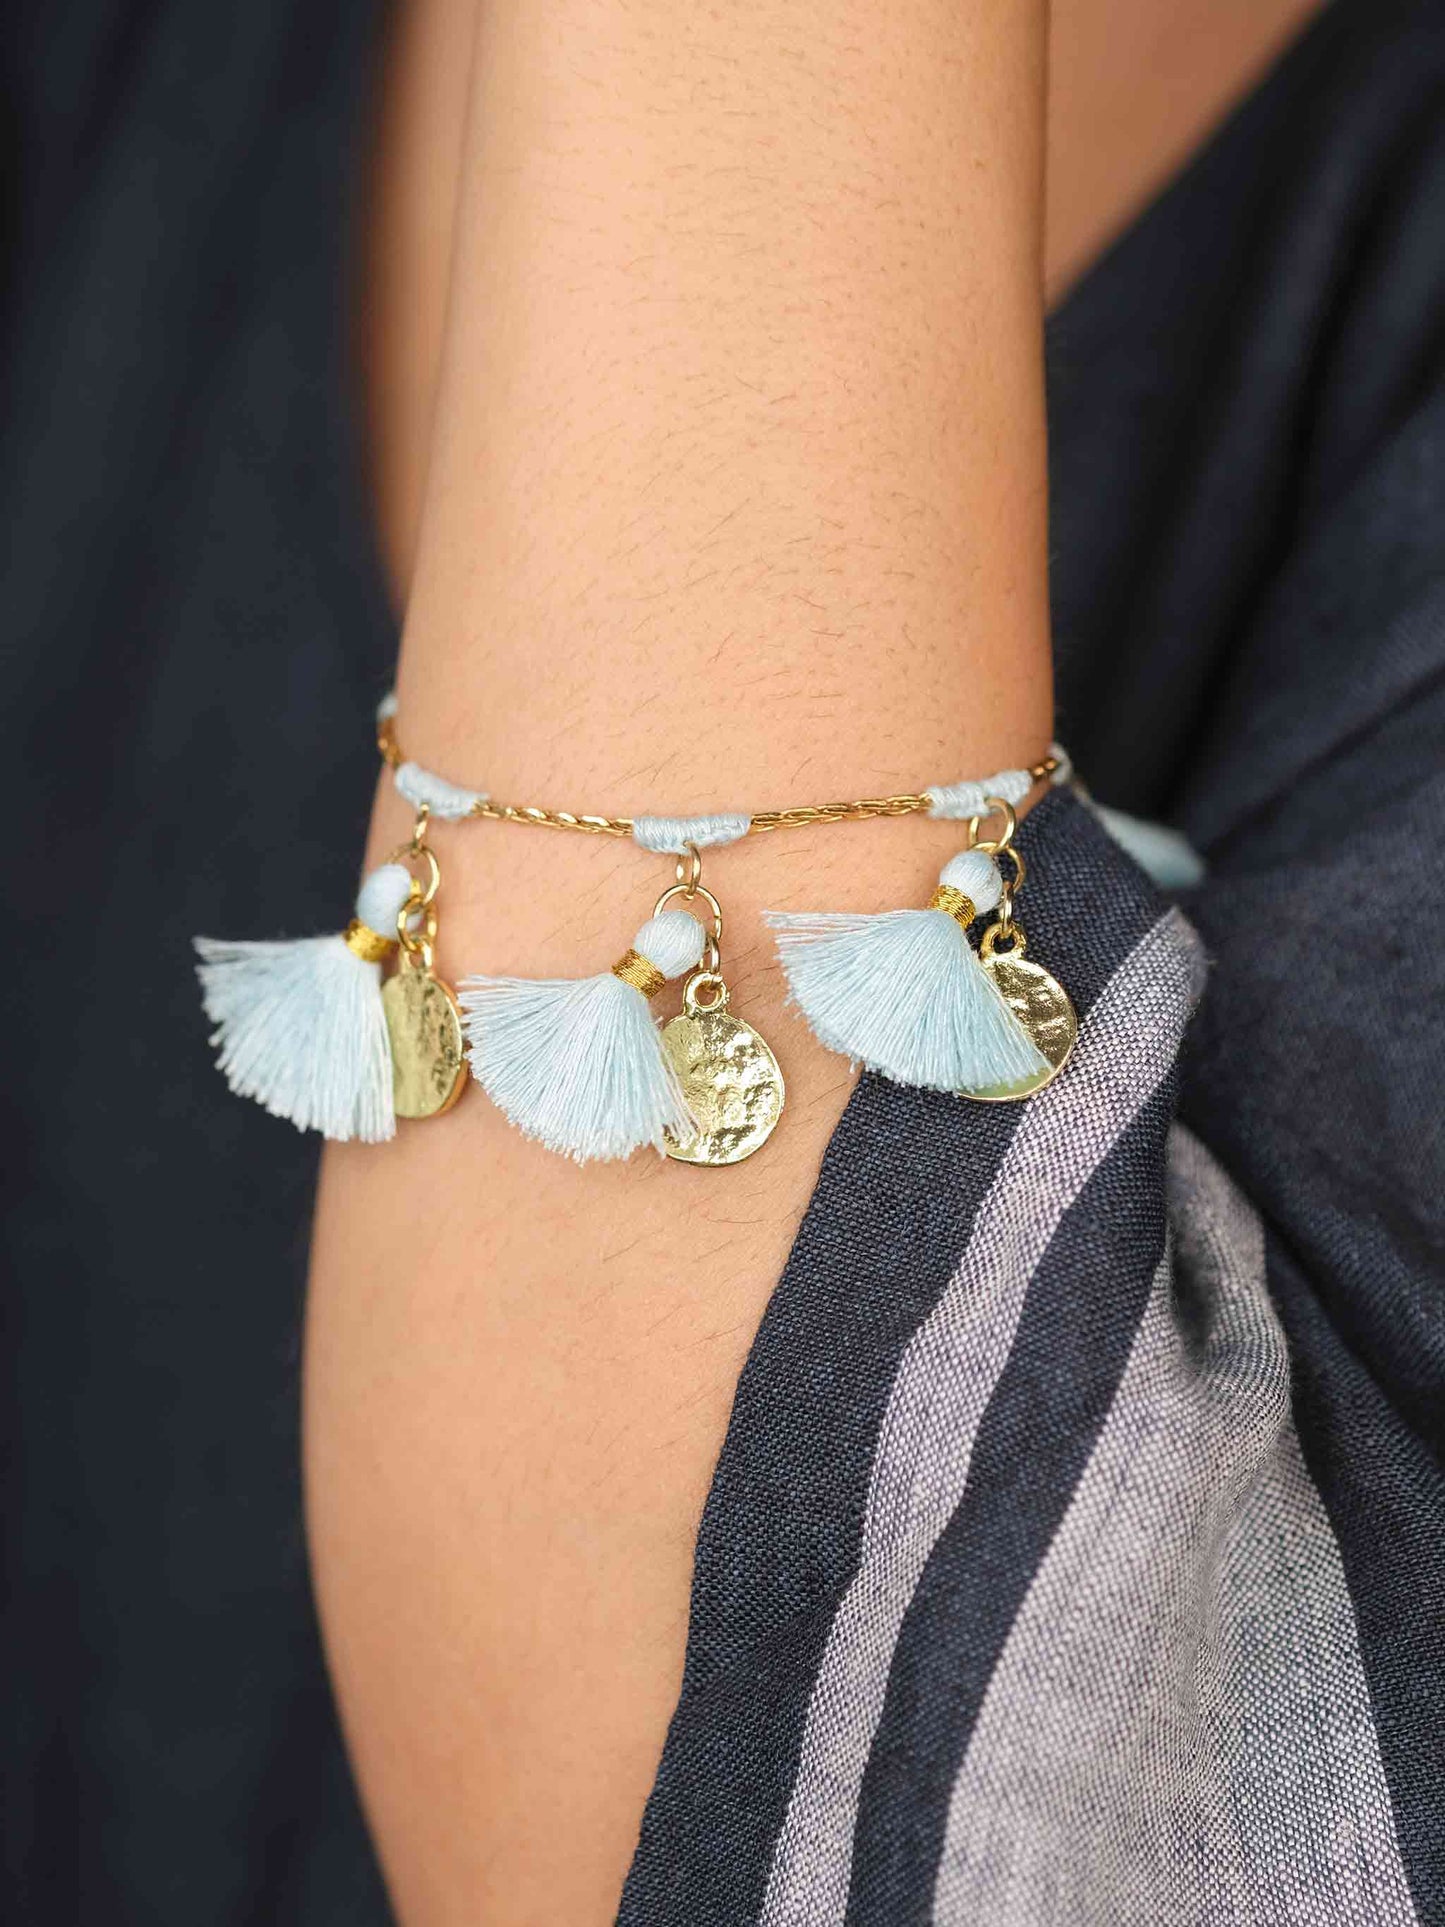 Bohemian glam in gold and candy blue fringe bracelet with stylish coin detailing.